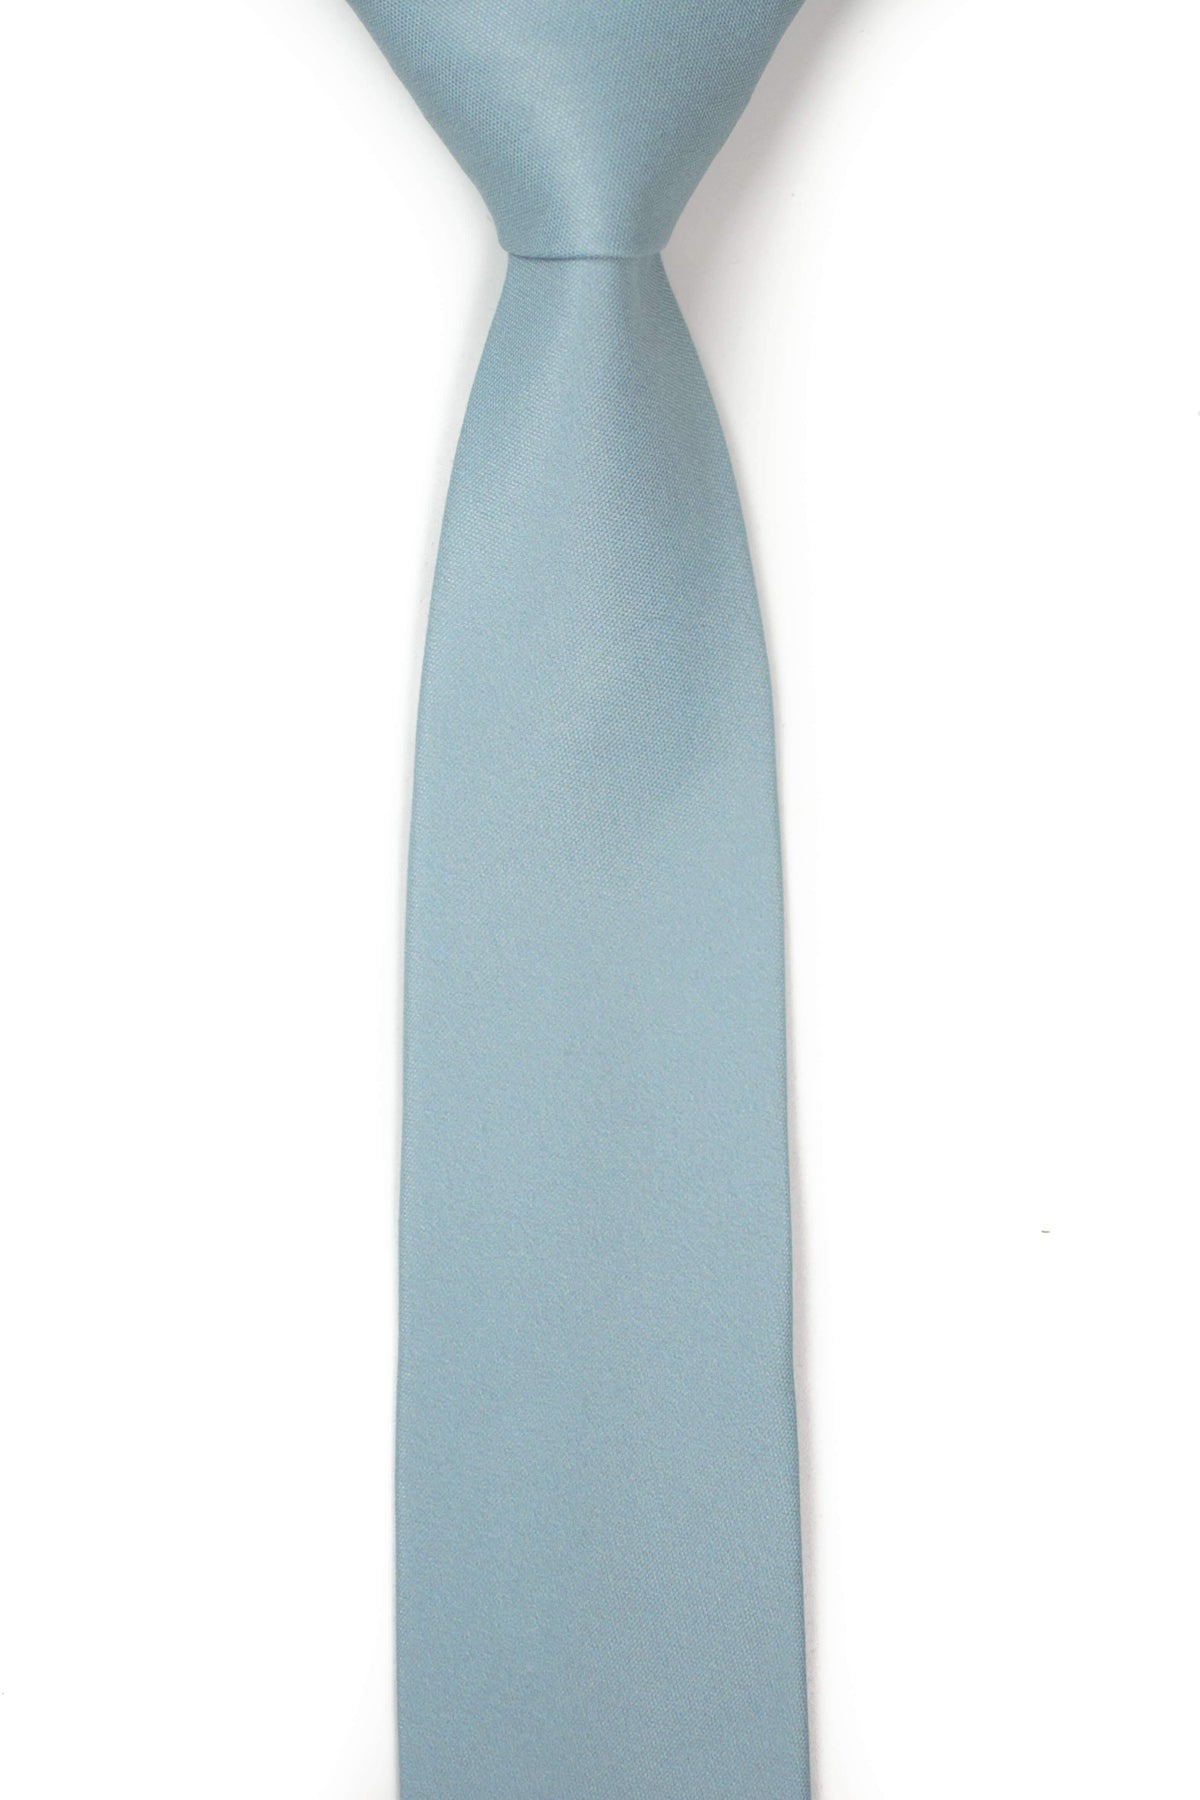 dusty mint tie front view by tough apparel